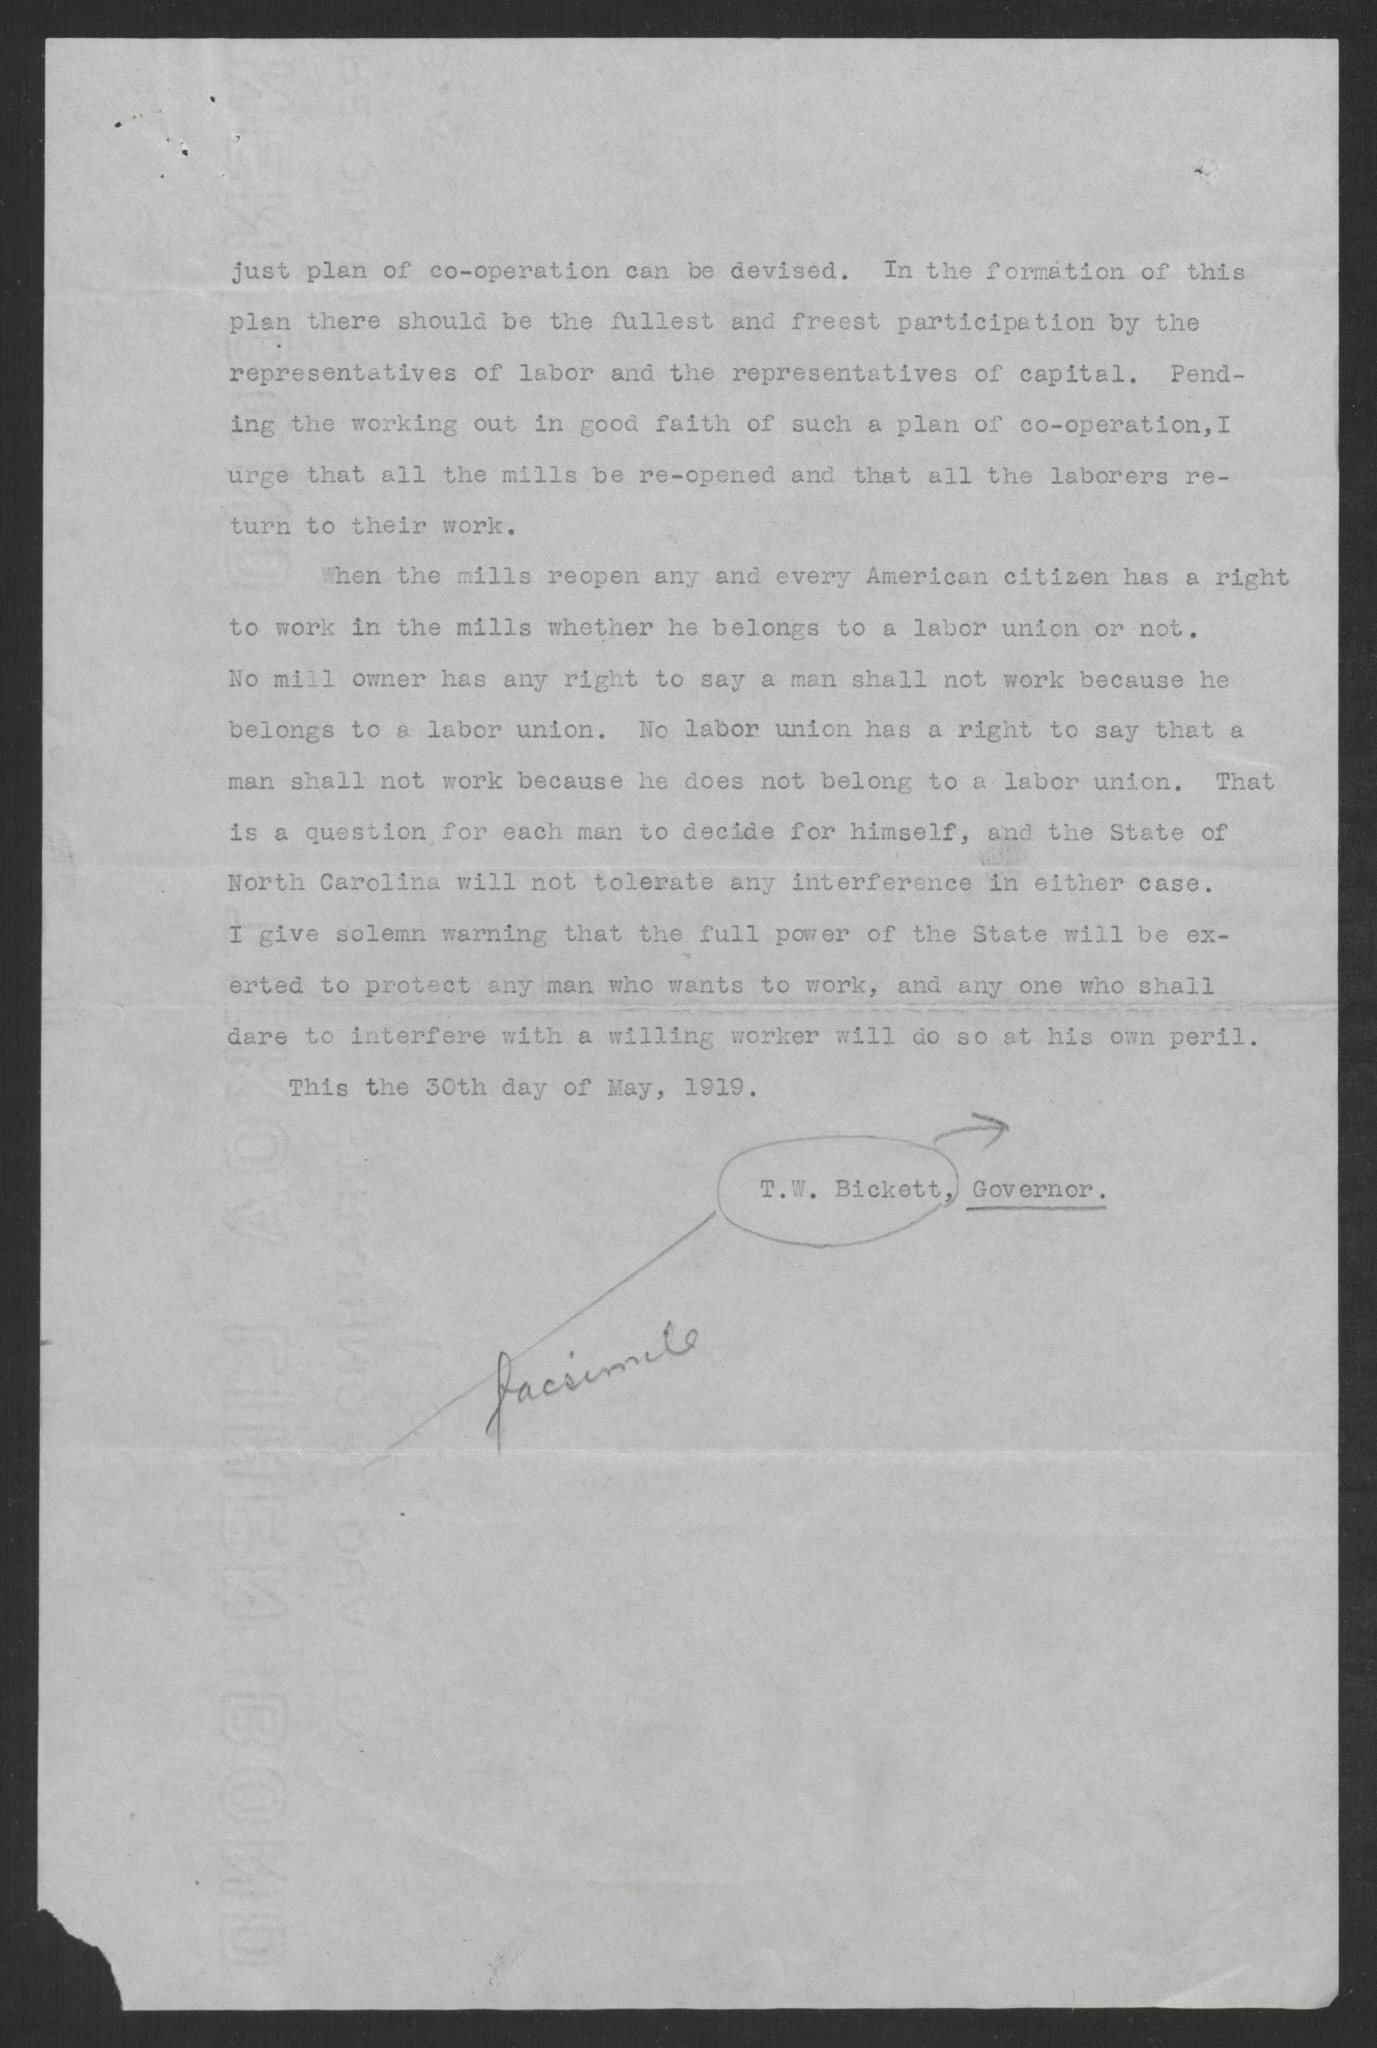 An Appeal to the People of Charlotte and Mecklenburg County for Co-operation of Labor and Capital by Gov. Thomas W. Bickett, May 30, 1919, page 3